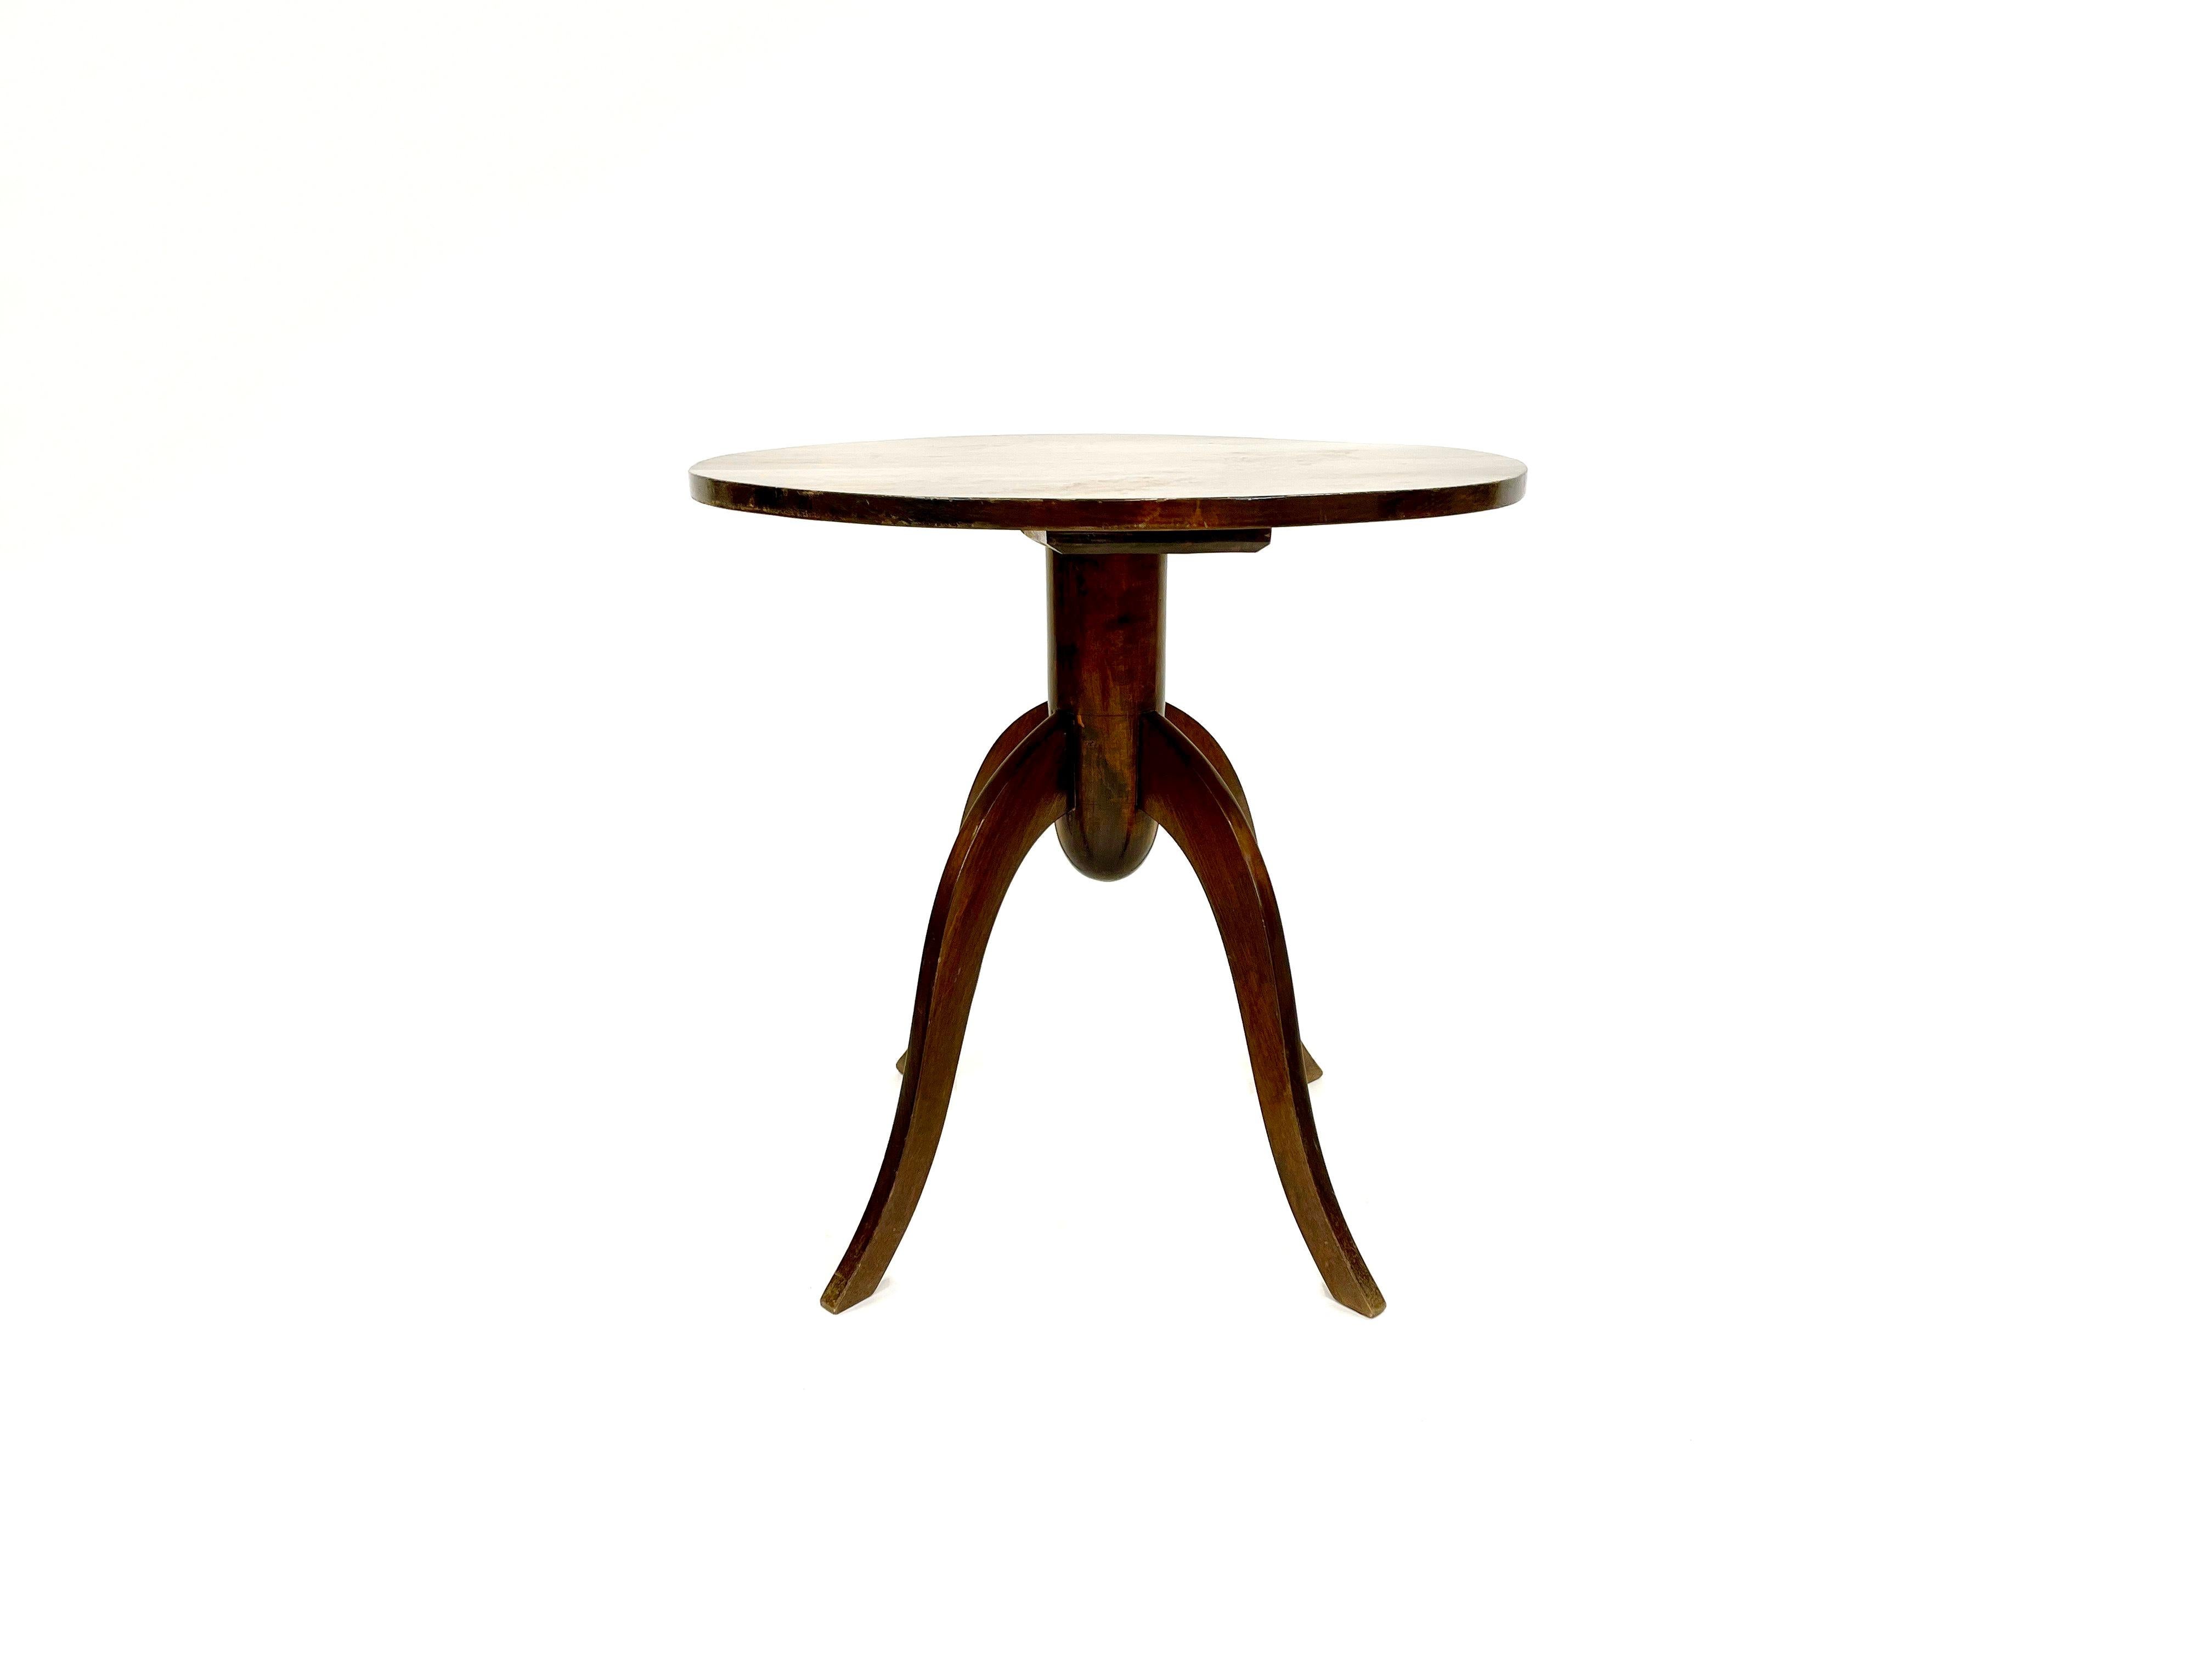 Rare Gunnel Nyman four-legged Finnish Modern Side Table. This exceptionally uncommon find, larger four-legged version is a testament to the designer's enduring influence on Finnish design. With its distinct blend of functionality and artistic flair,